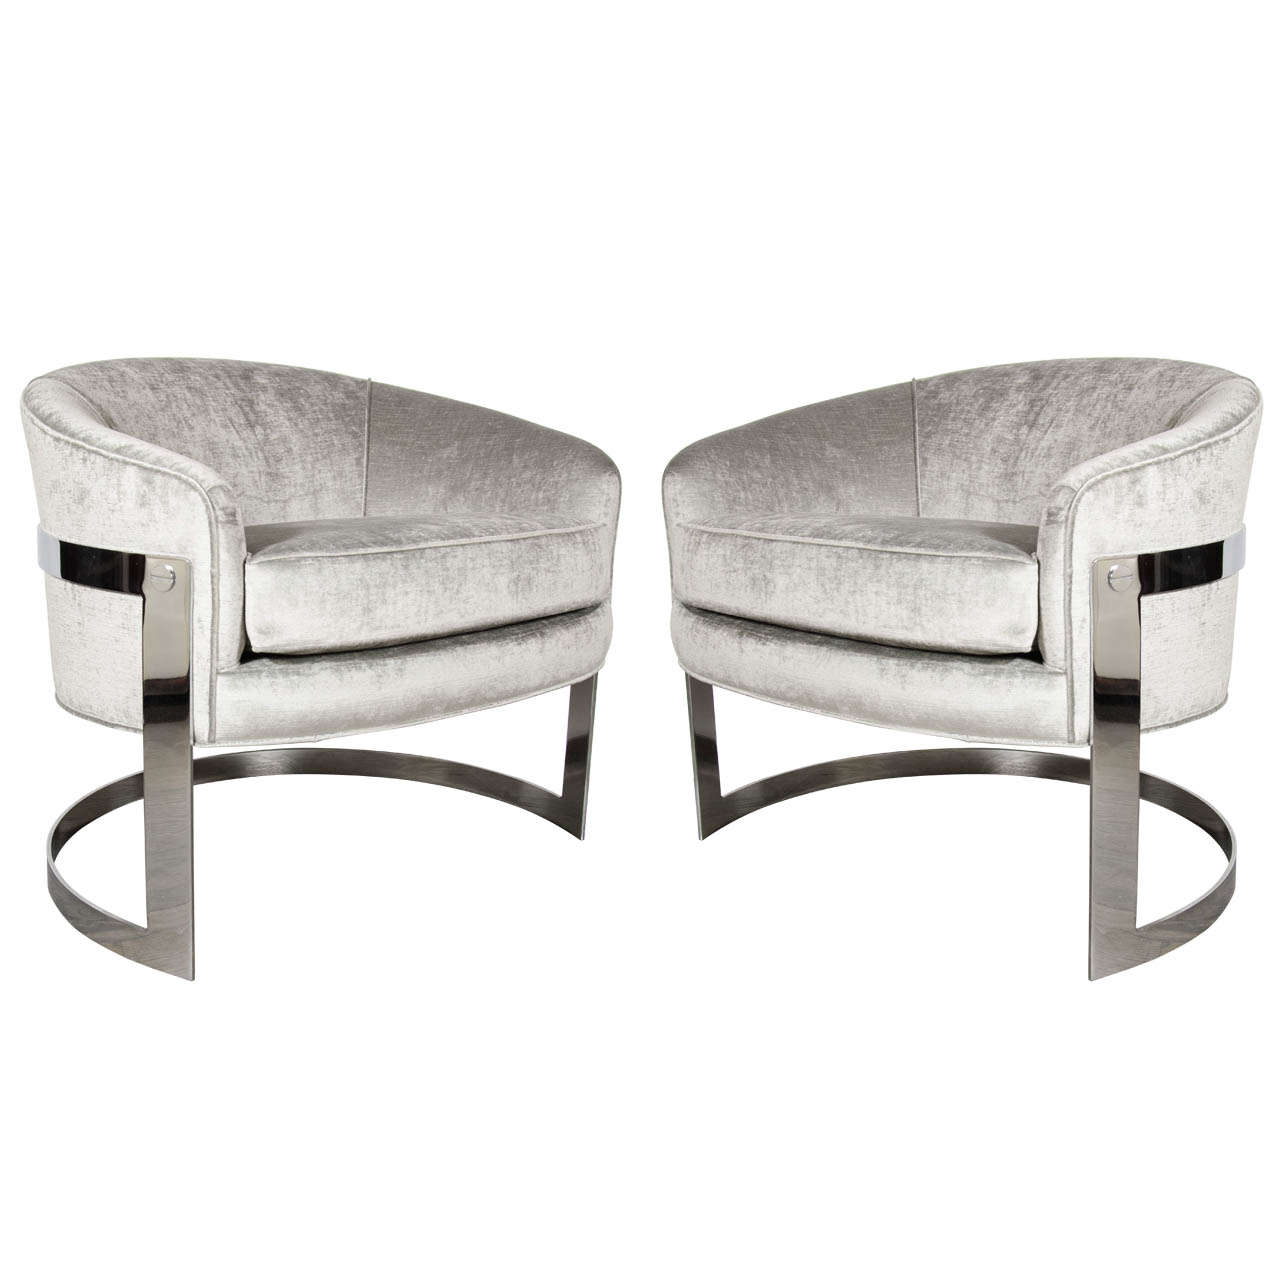 Mid-Century Modern Pair of Modernist Semi-Circular Chrome Banded Occasional Chairs by Milo Baughman